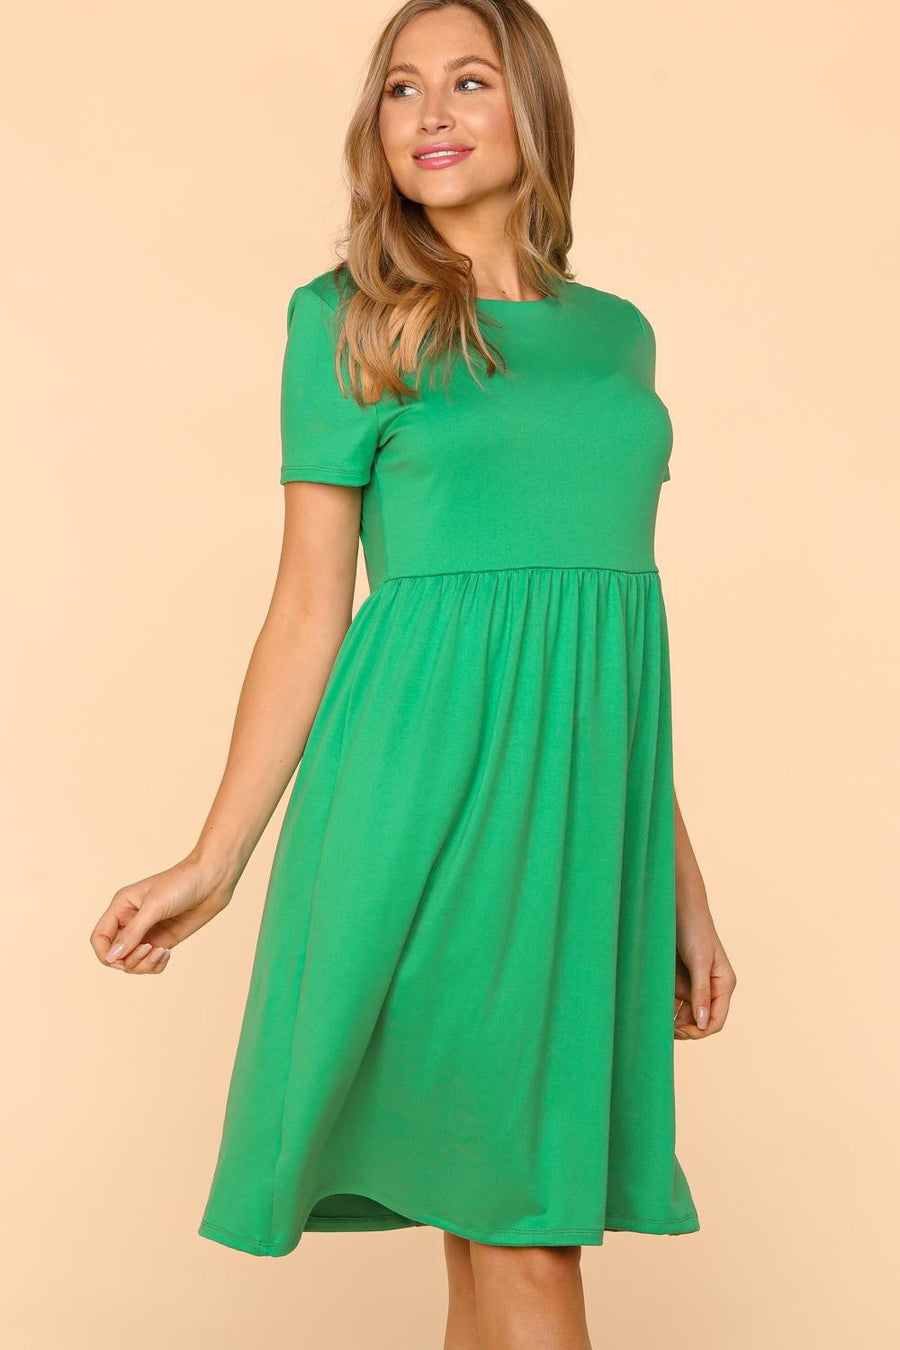 Kailey Dress with Pockets *FINALE SALE*